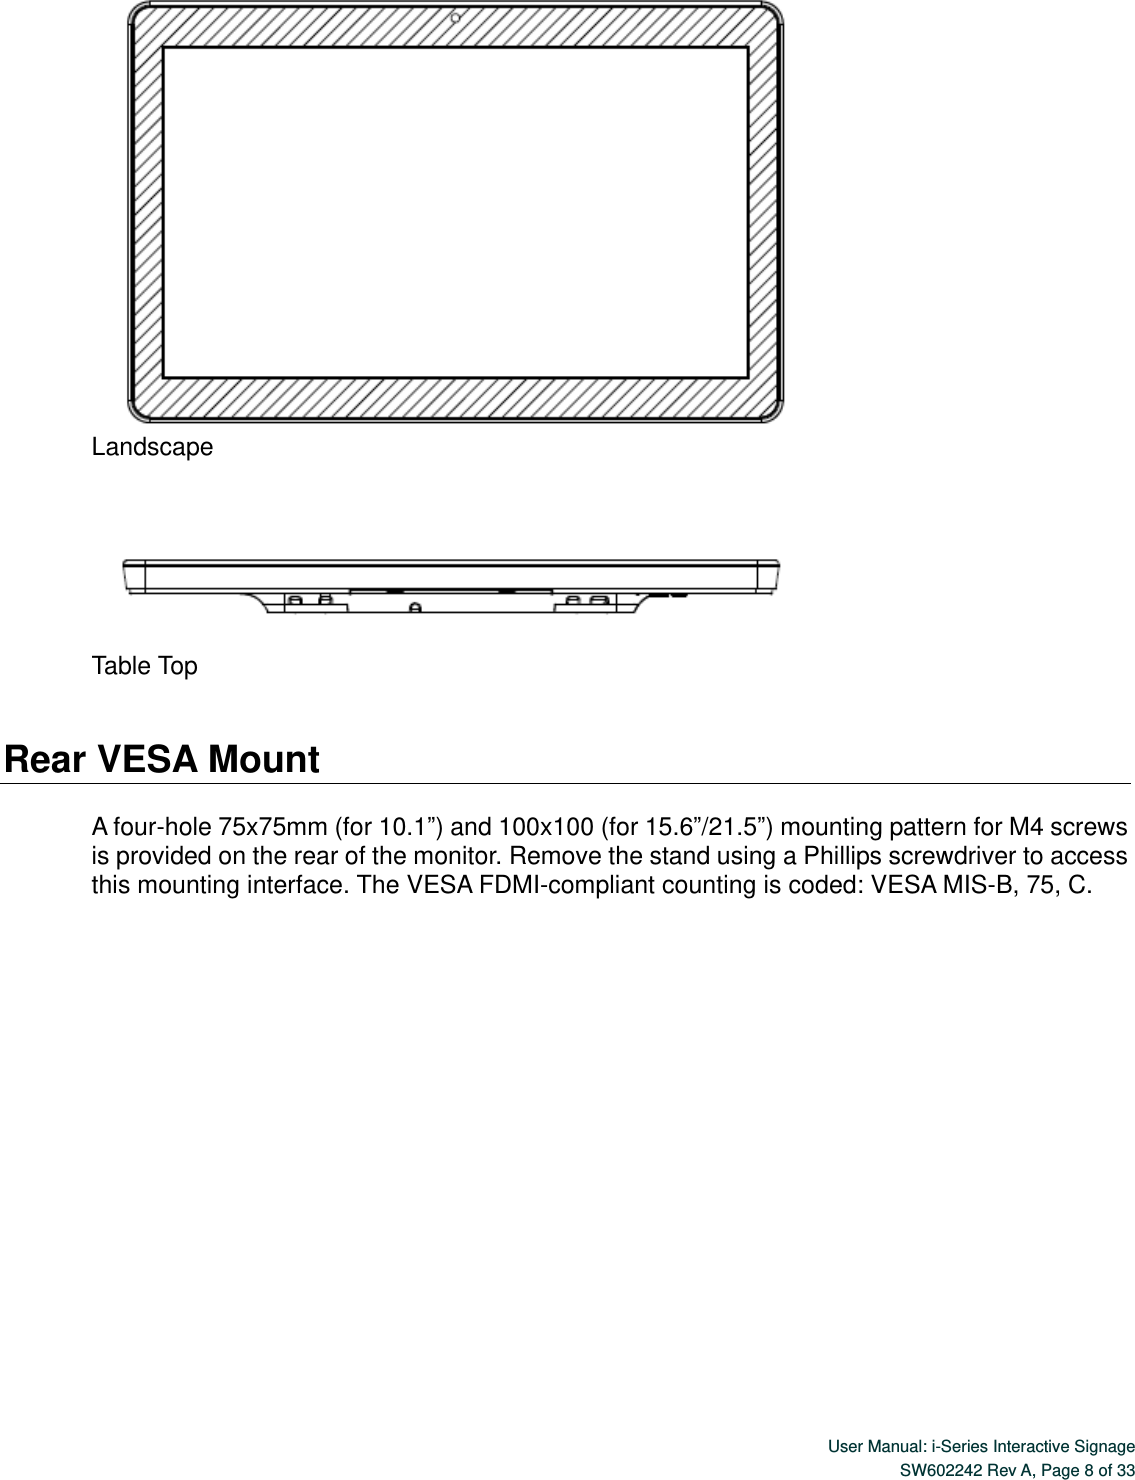  User Manual: i-Series Interactive Signage SW602242 Rev A, Page 8 of 33    Landscape      Table Top   Rear VESA Mount  A four-hole 75x75mm (for 10.1”) and 100x100 (for 15.6”/21.5”) mounting pattern for M4 screws is provided on the rear of the monitor. Remove the stand using a Phillips screwdriver to access this mounting interface. The VESA FDMI-compliant counting is coded: VESA MIS-B, 75, C.      